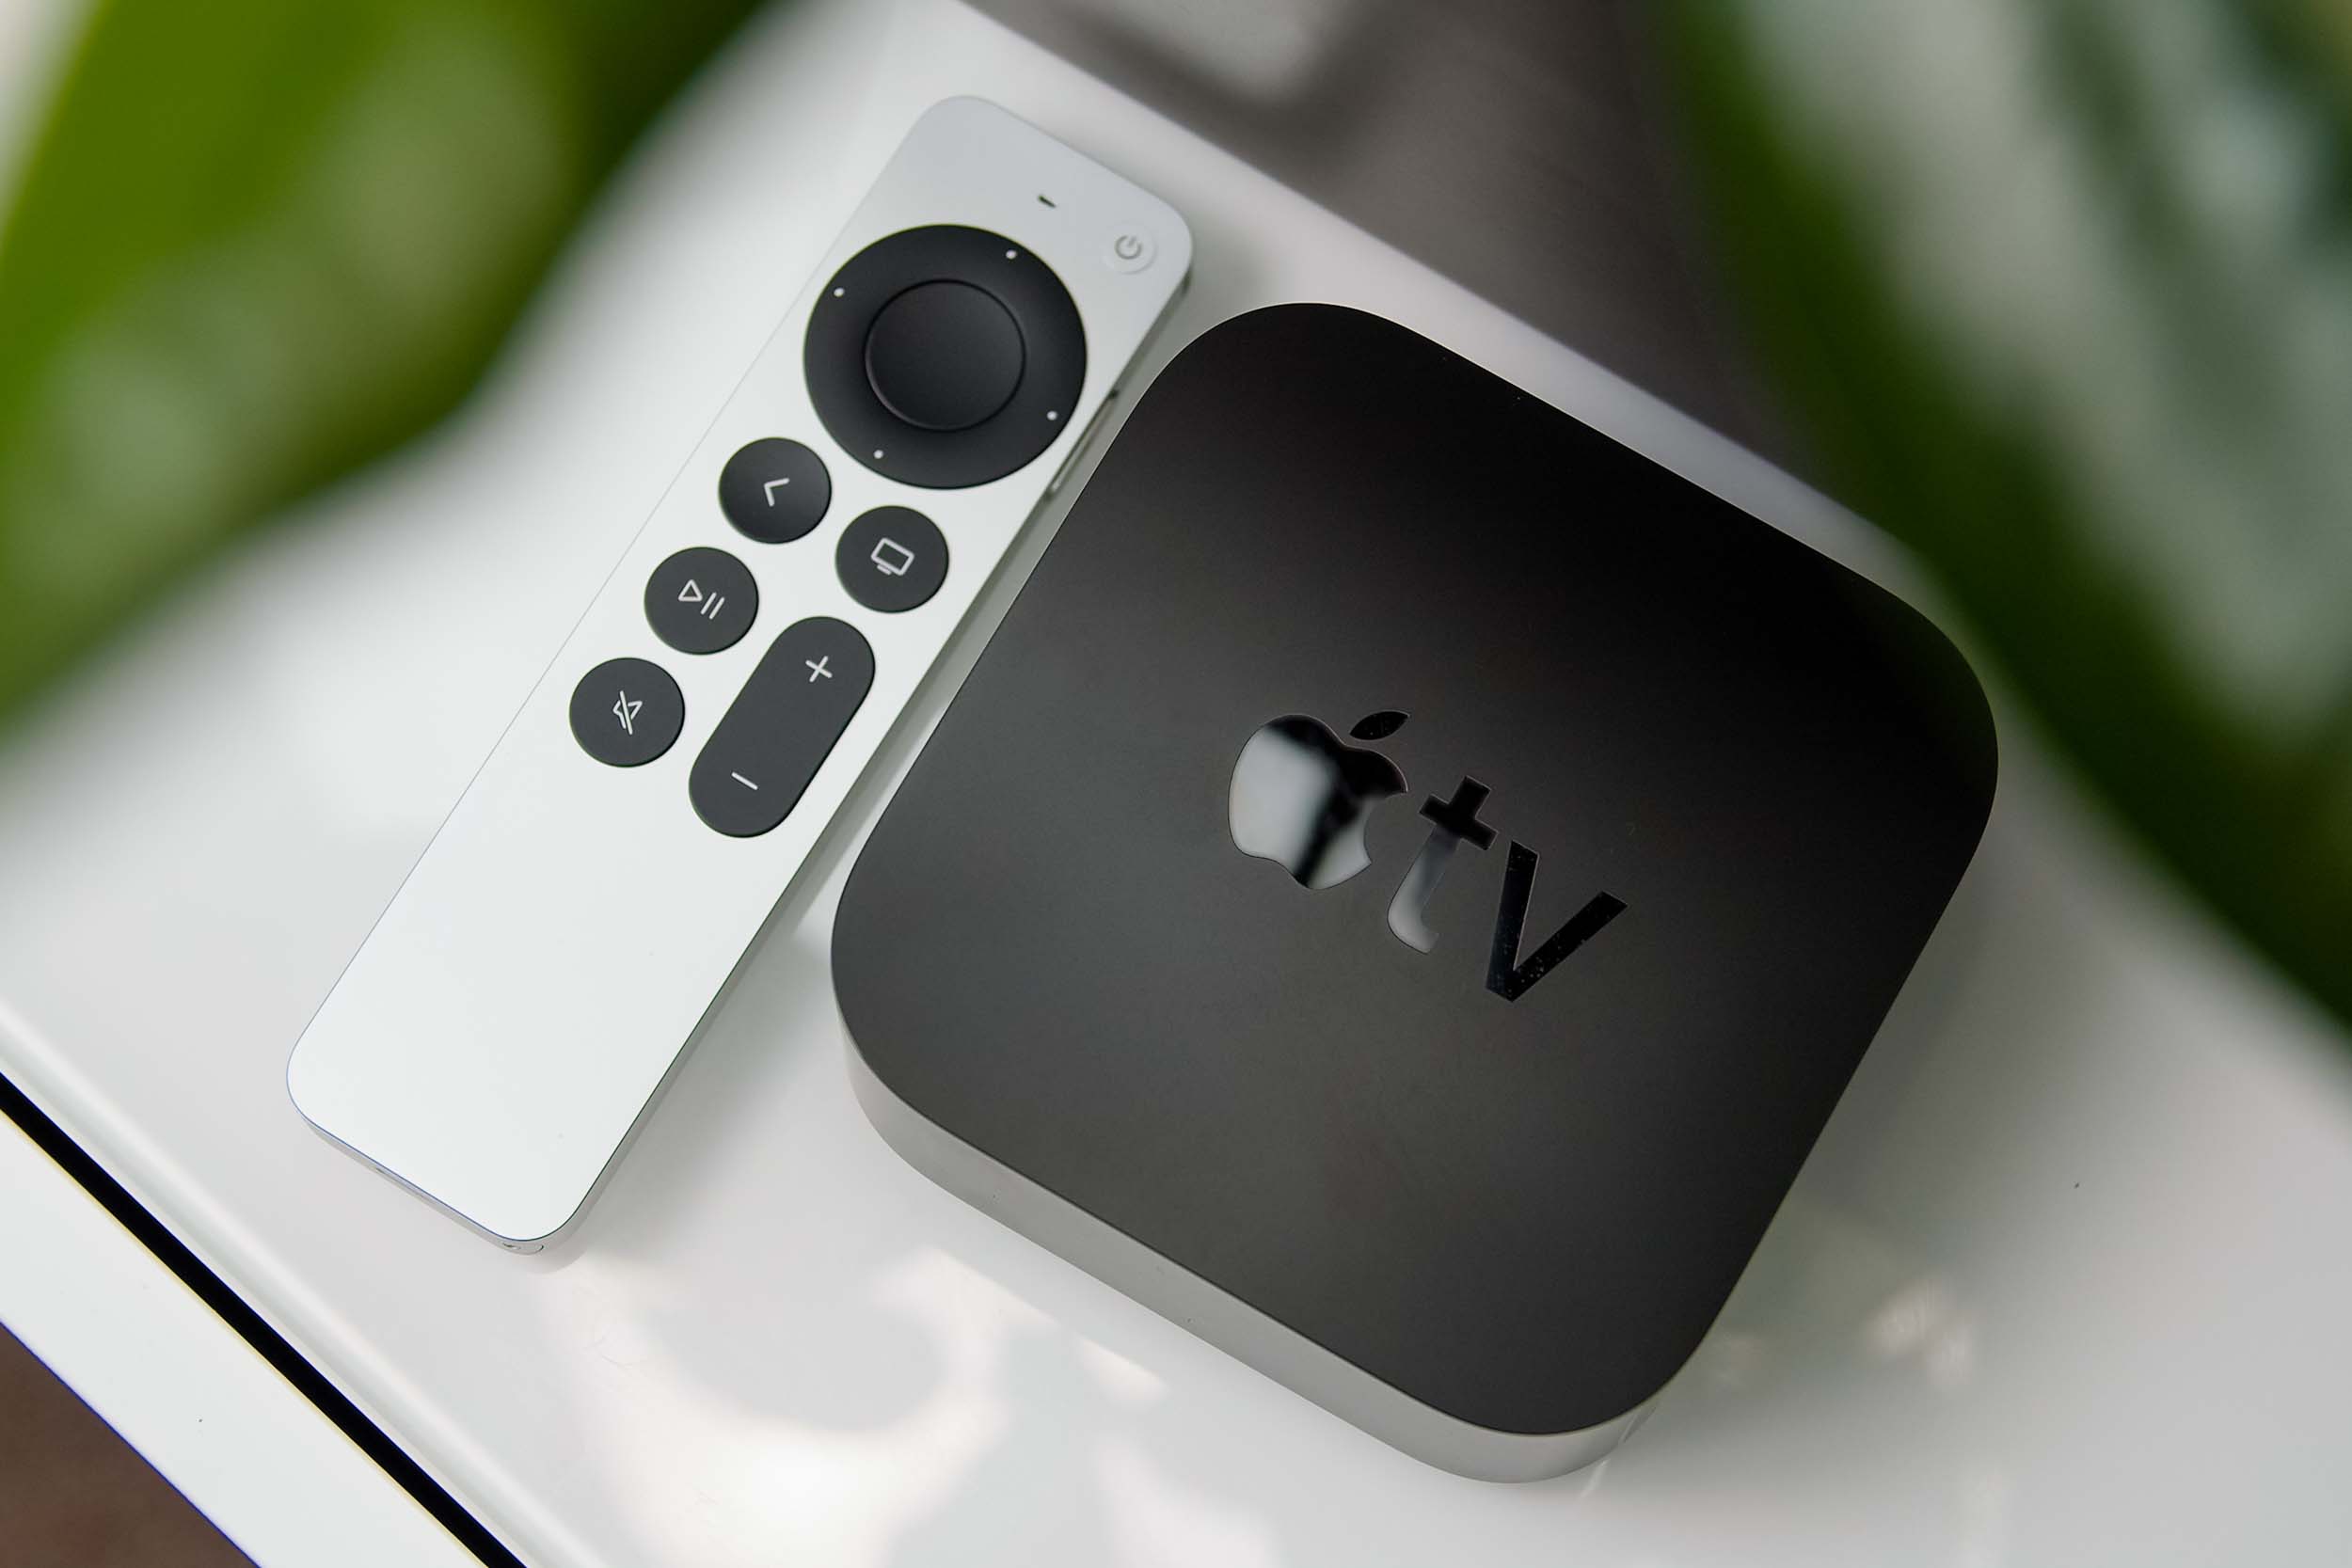 Dam overholdelse kugle Common Apple TV problems and how to fix them | Digital Trends